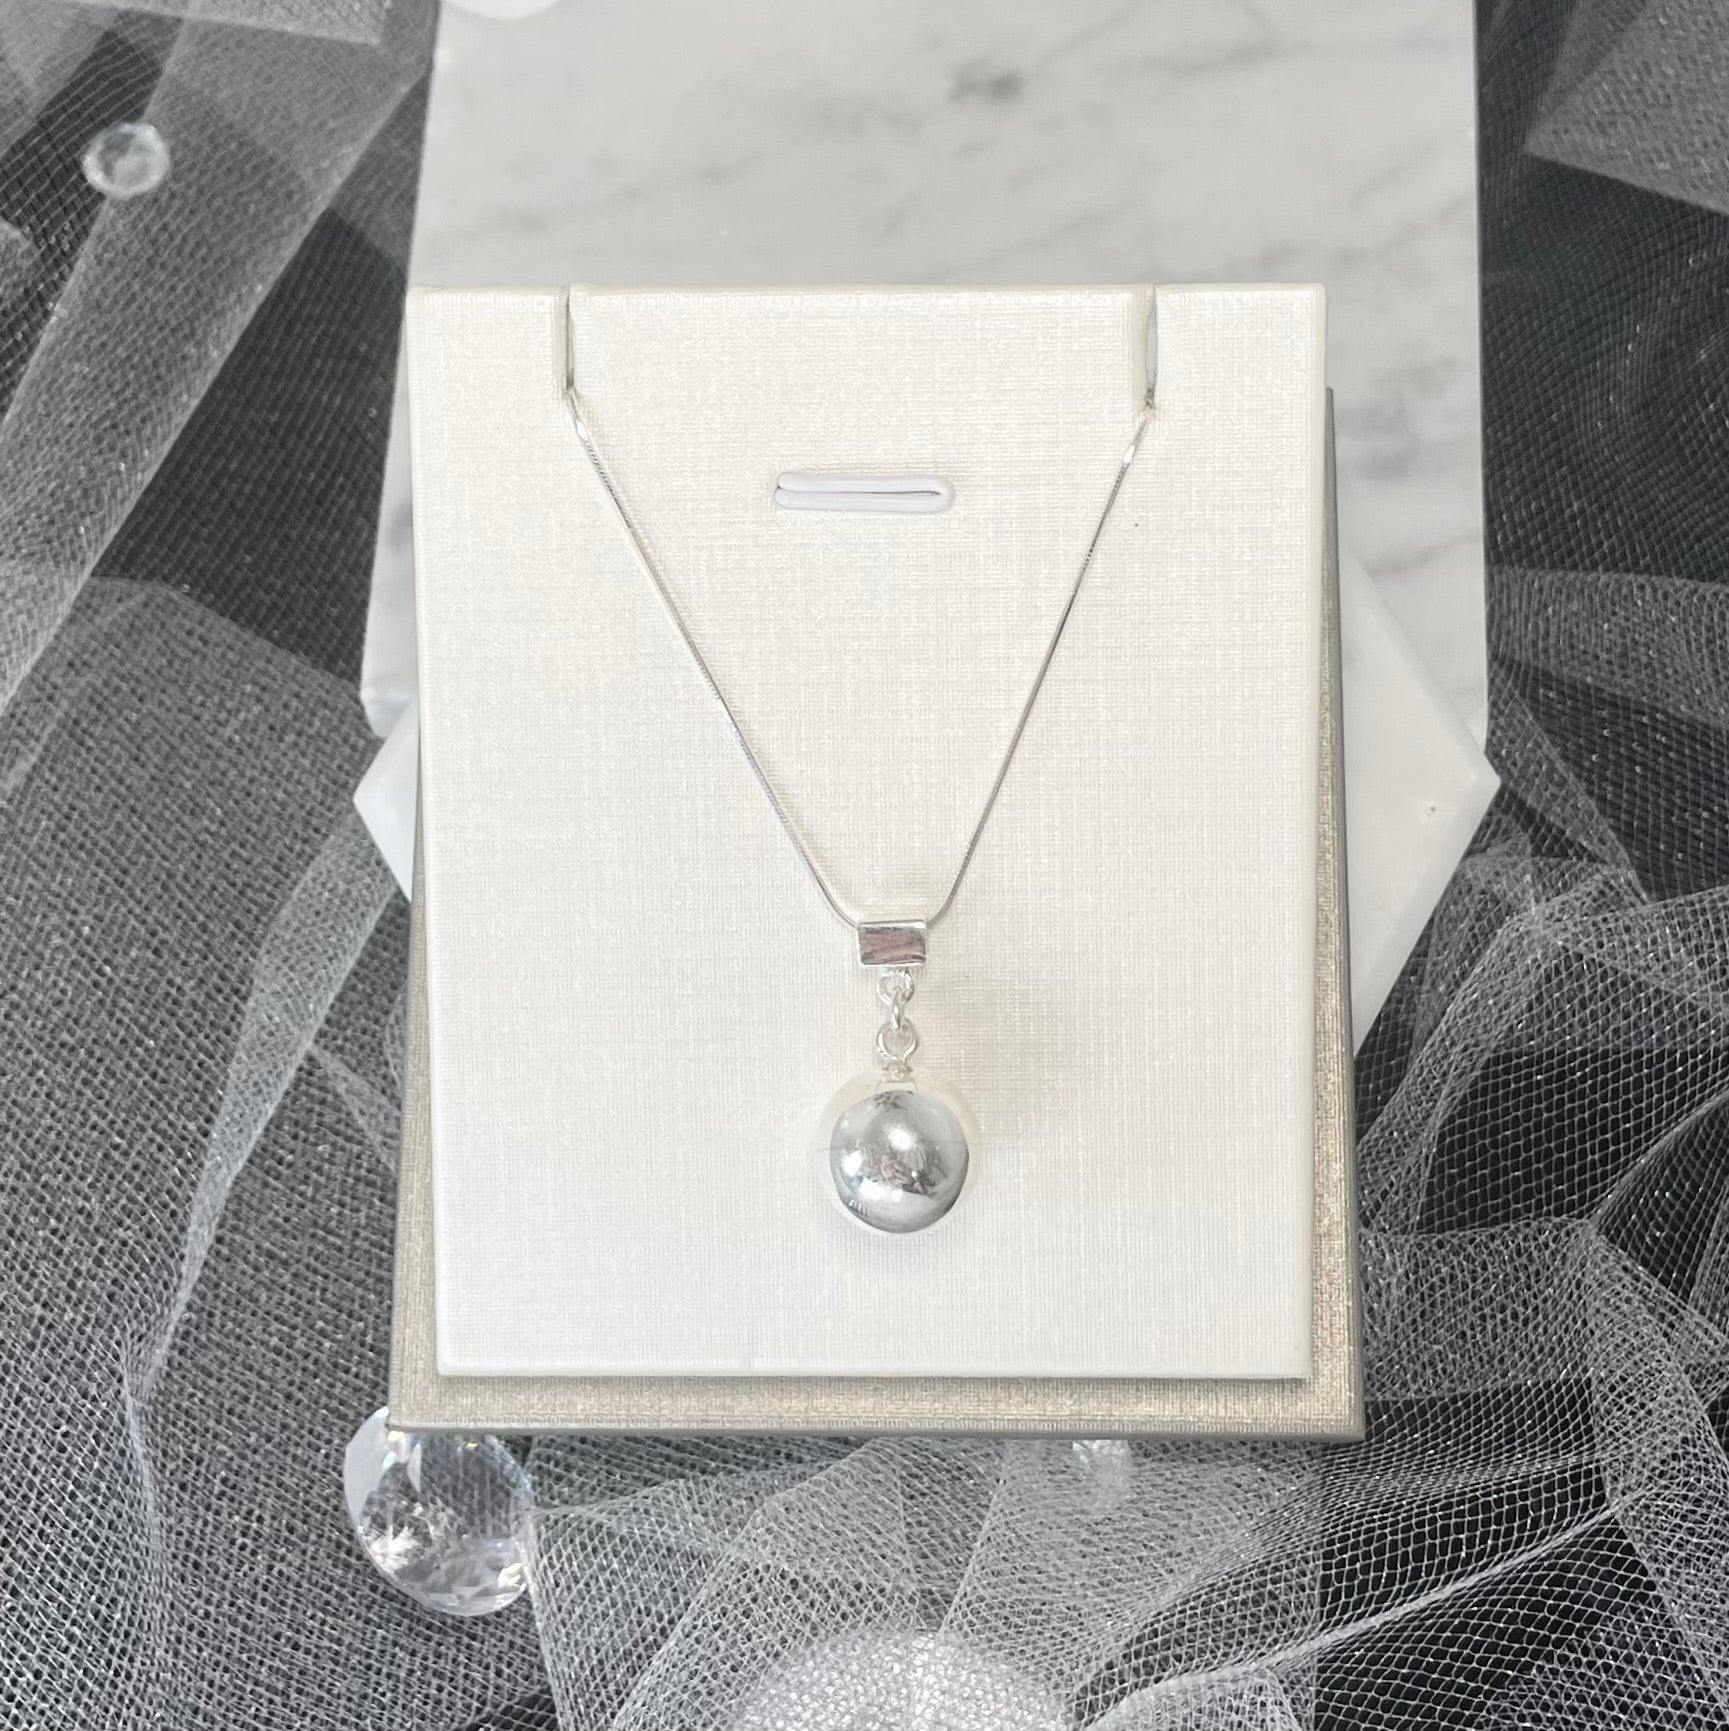 Introducing the Merlin Silver Necklace, a round silver pendant necklace with intricate design details. The pendant is complemented by a round ball. Suitable for casual and formal attire.